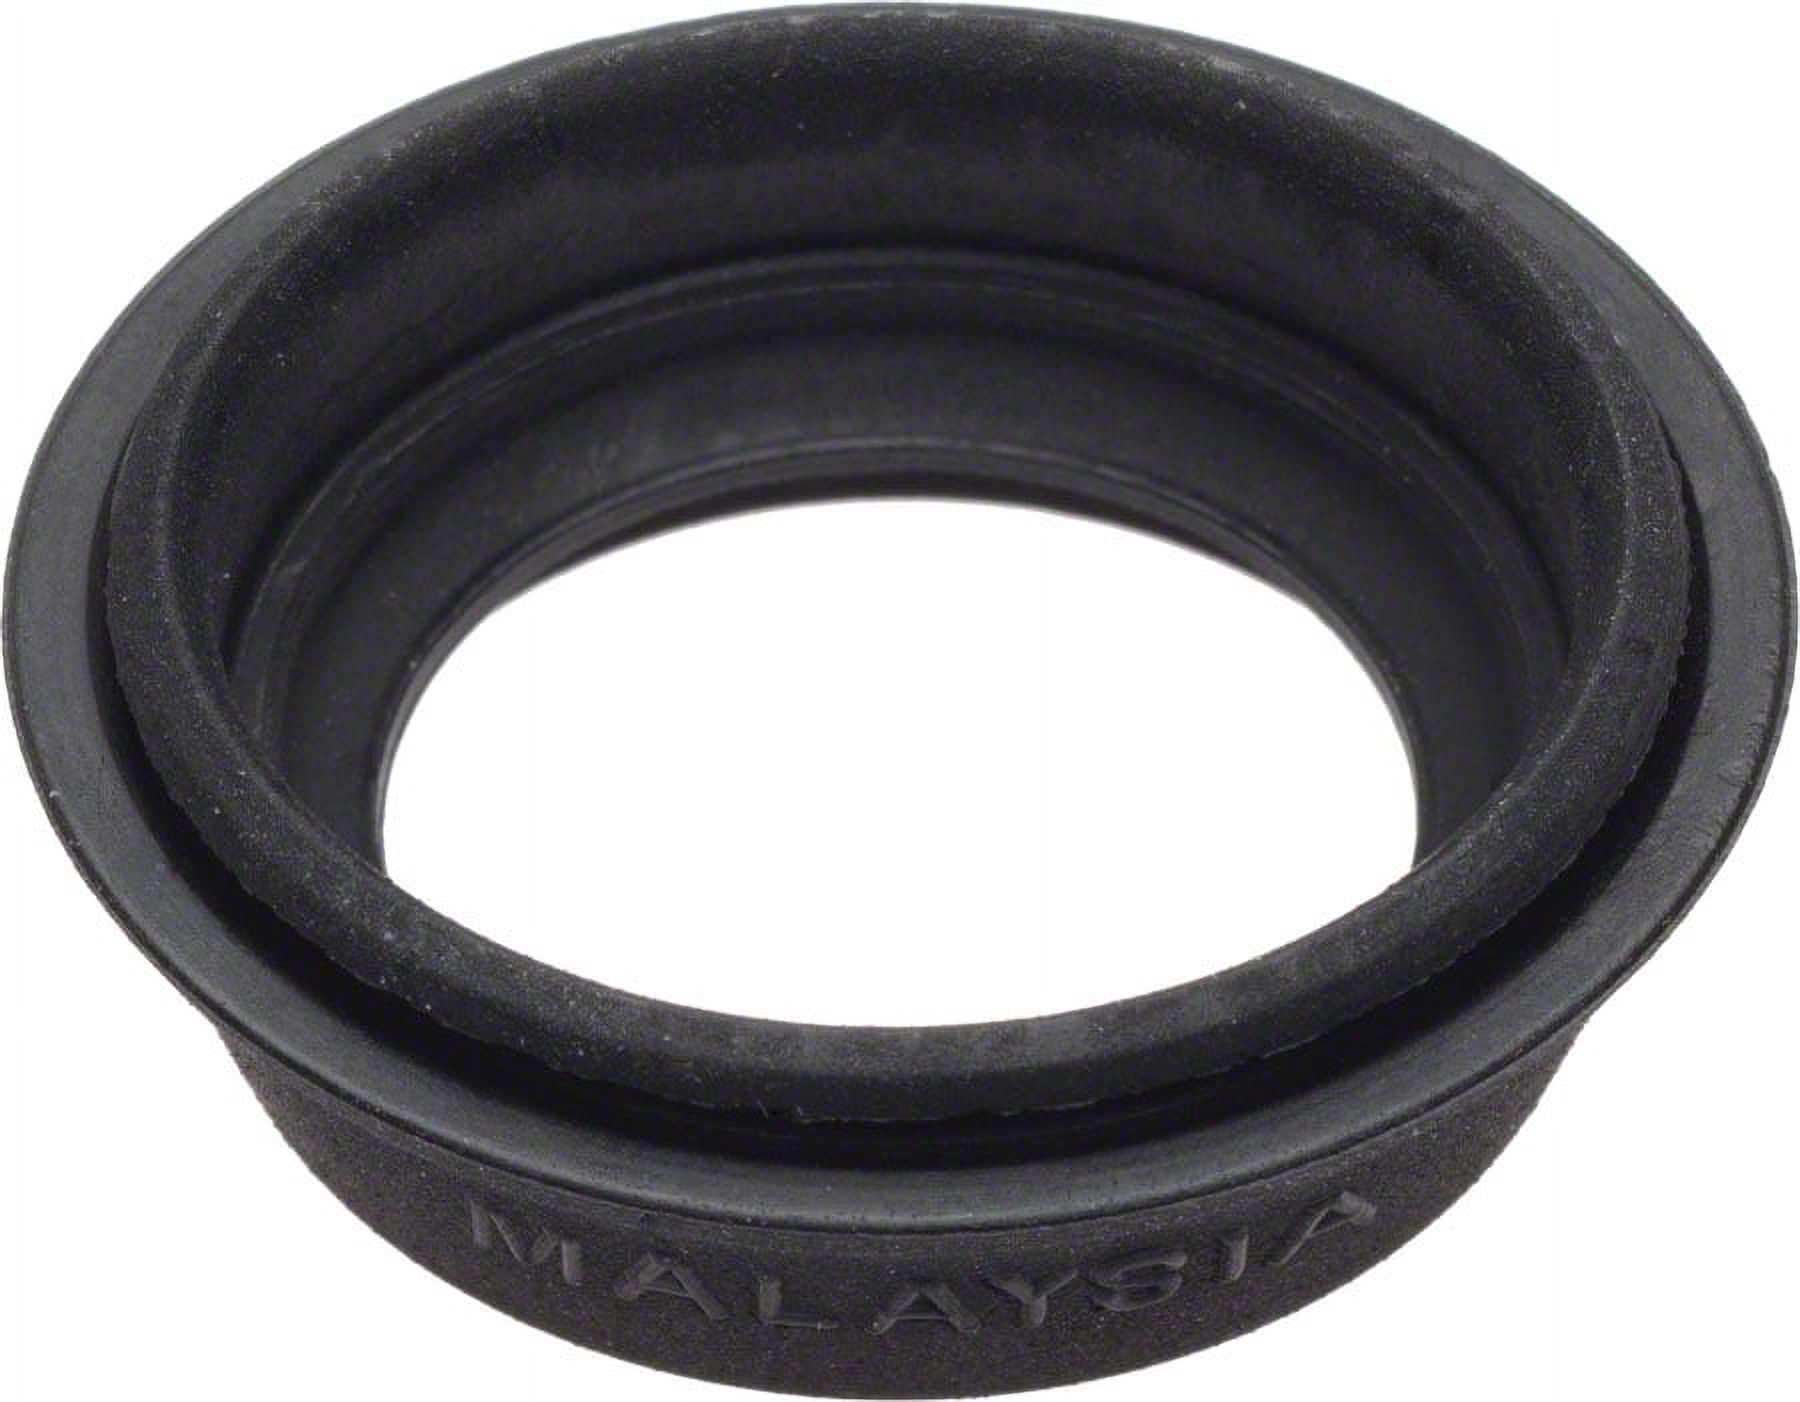 Shimano Front Hub Rubber Dust Cap Fits HB-MC10 HB-M530 HB-M510 others - image 1 of 1